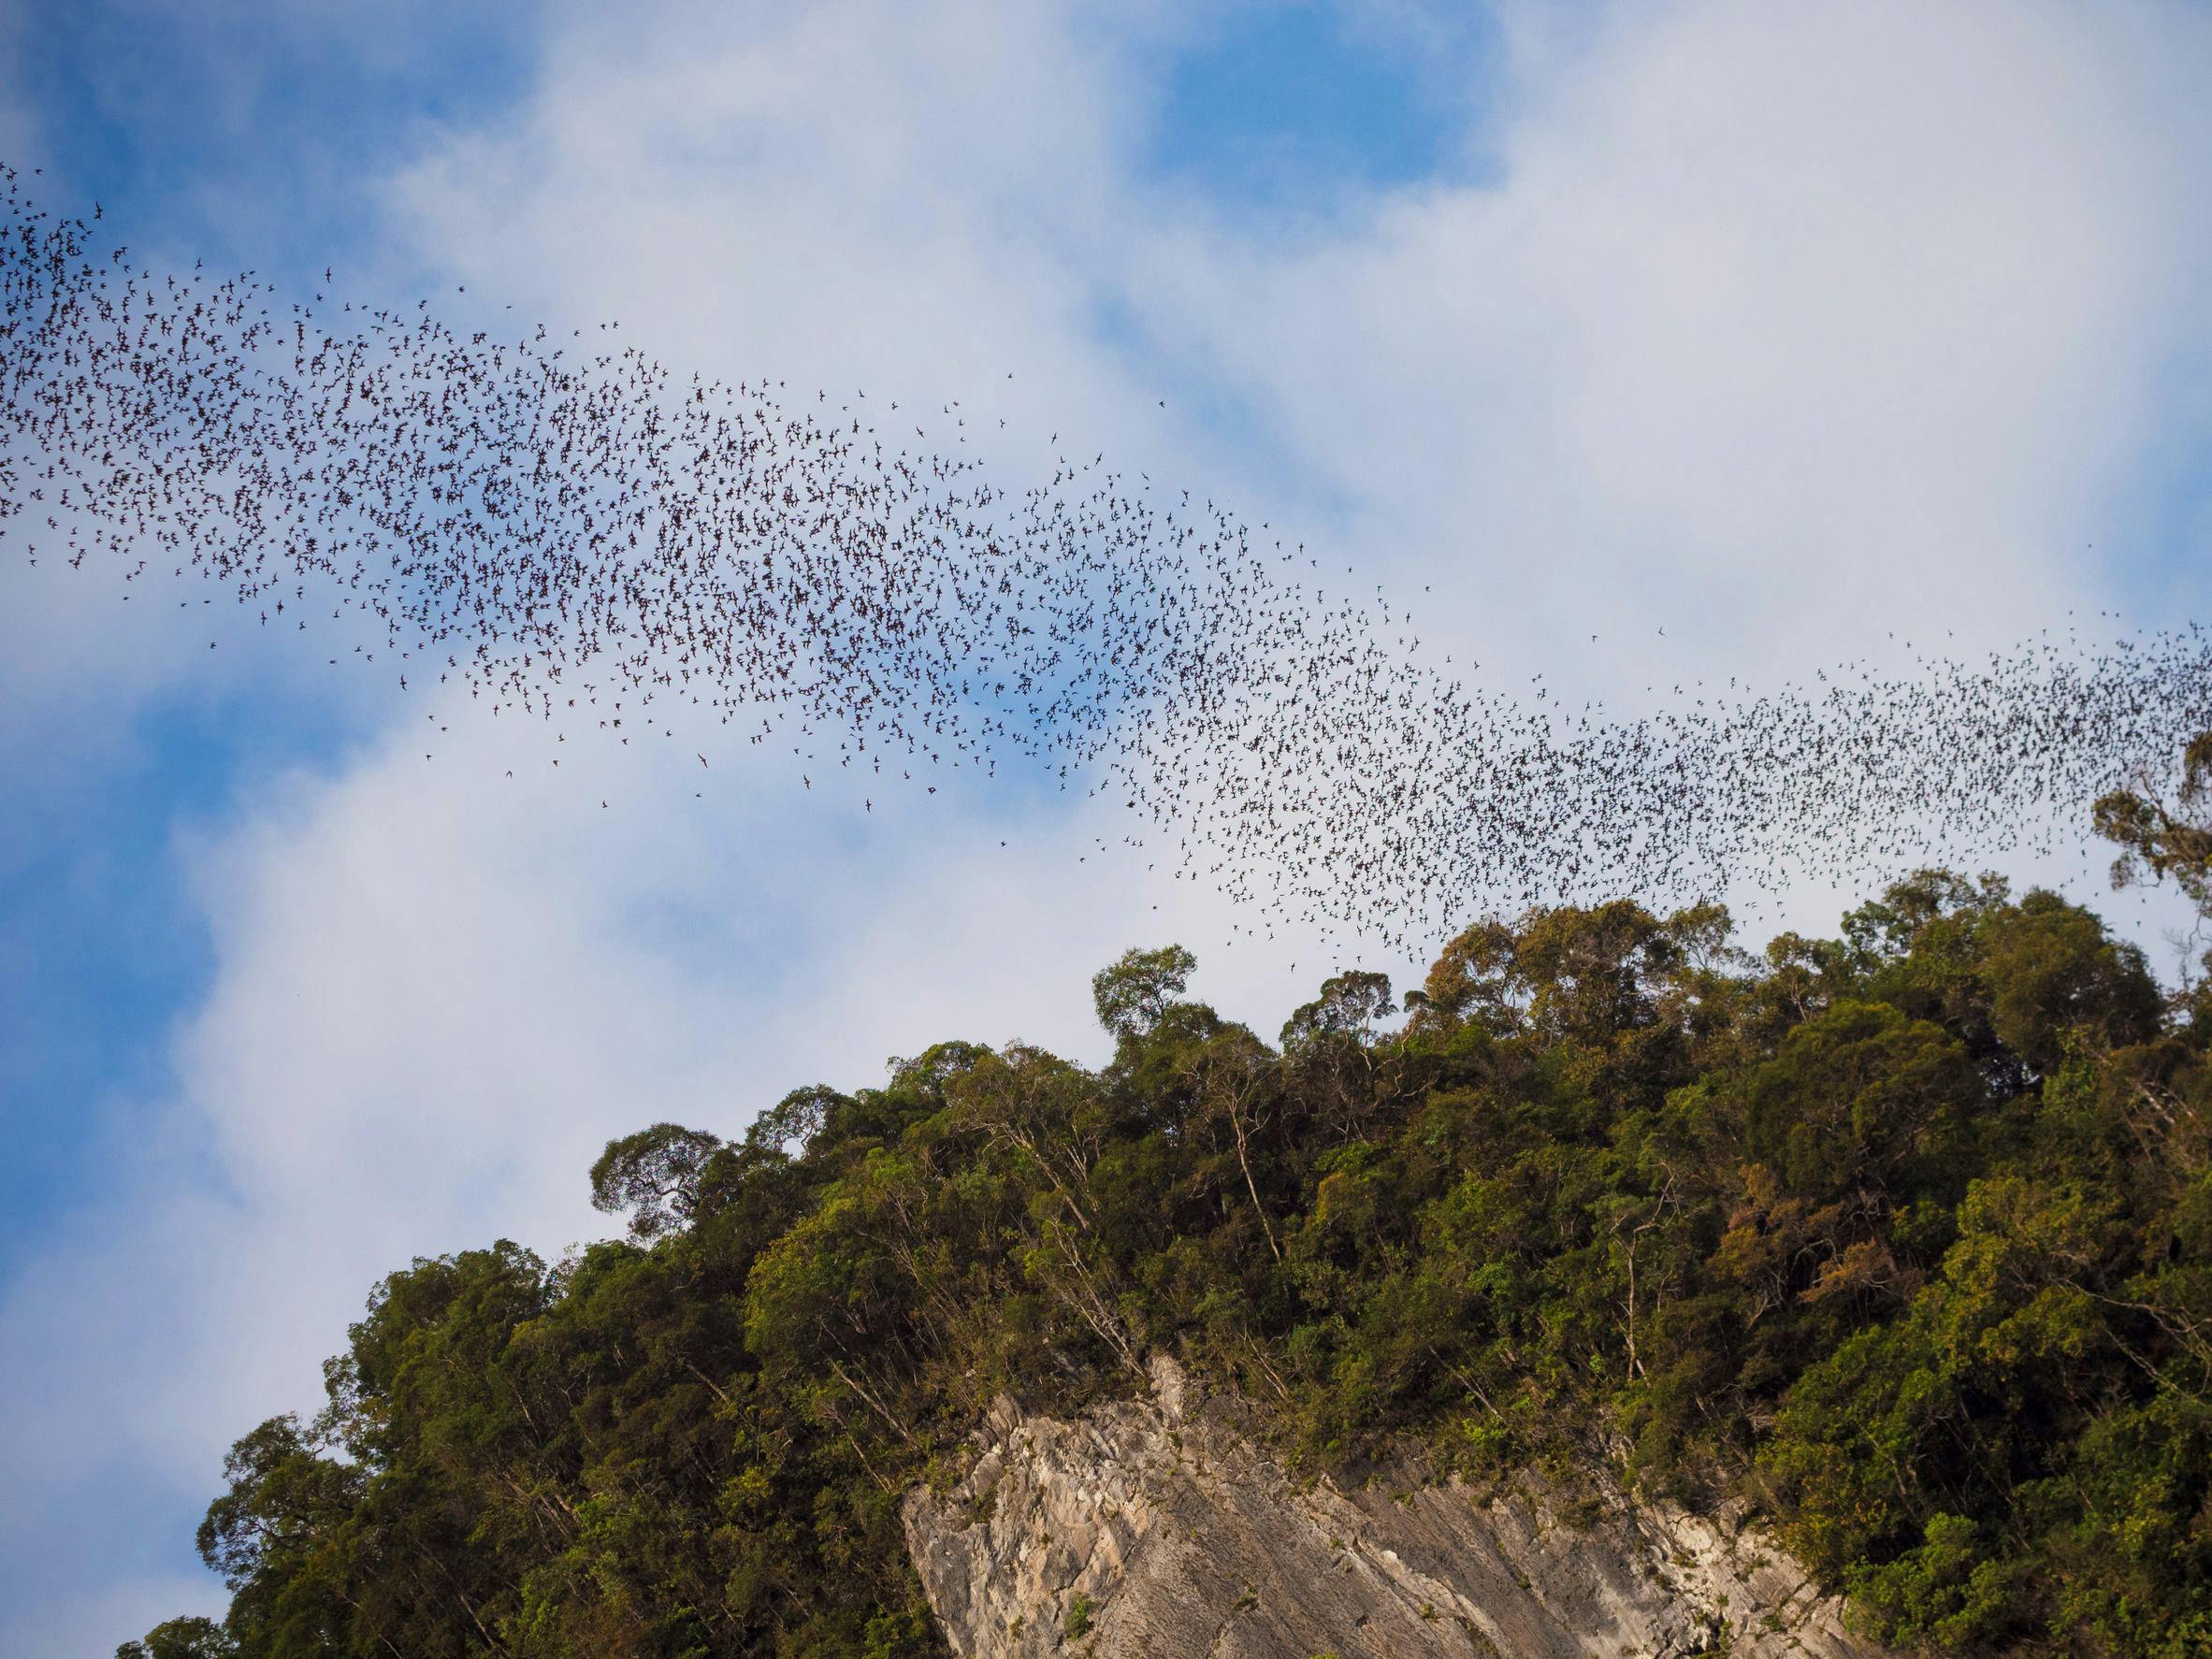 The incredible sight of the mass exodus of bats from Deer Cave